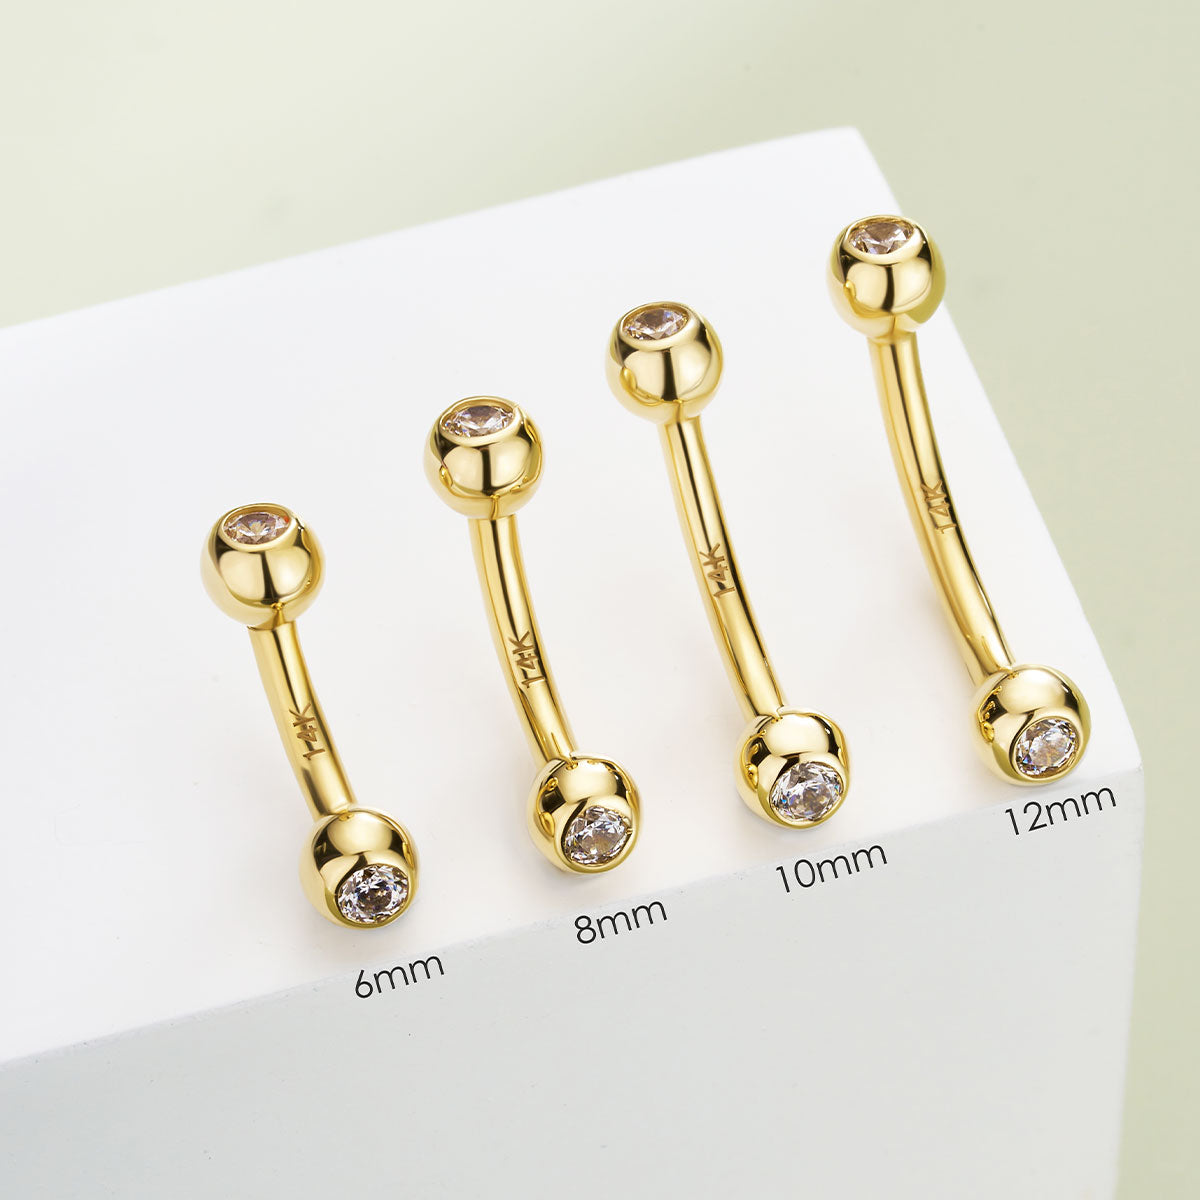 12mm solid gold belly ring